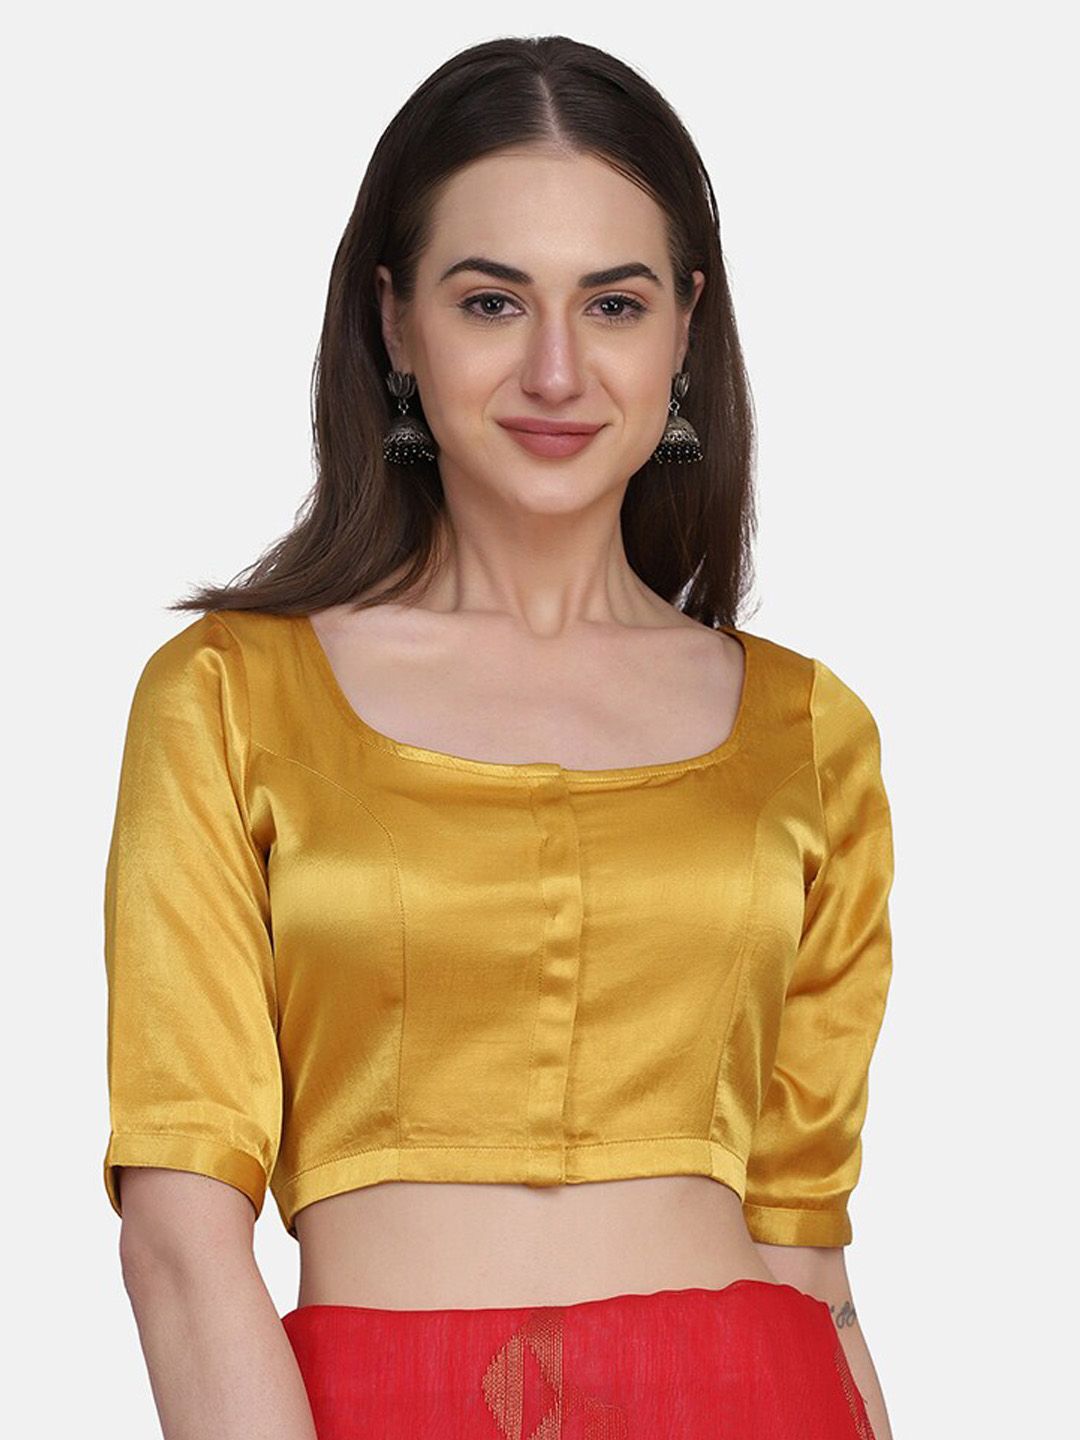 THE WEAVE TRAVELLER Women Mustard Solid Square-Neck Saree Blouse Price in India